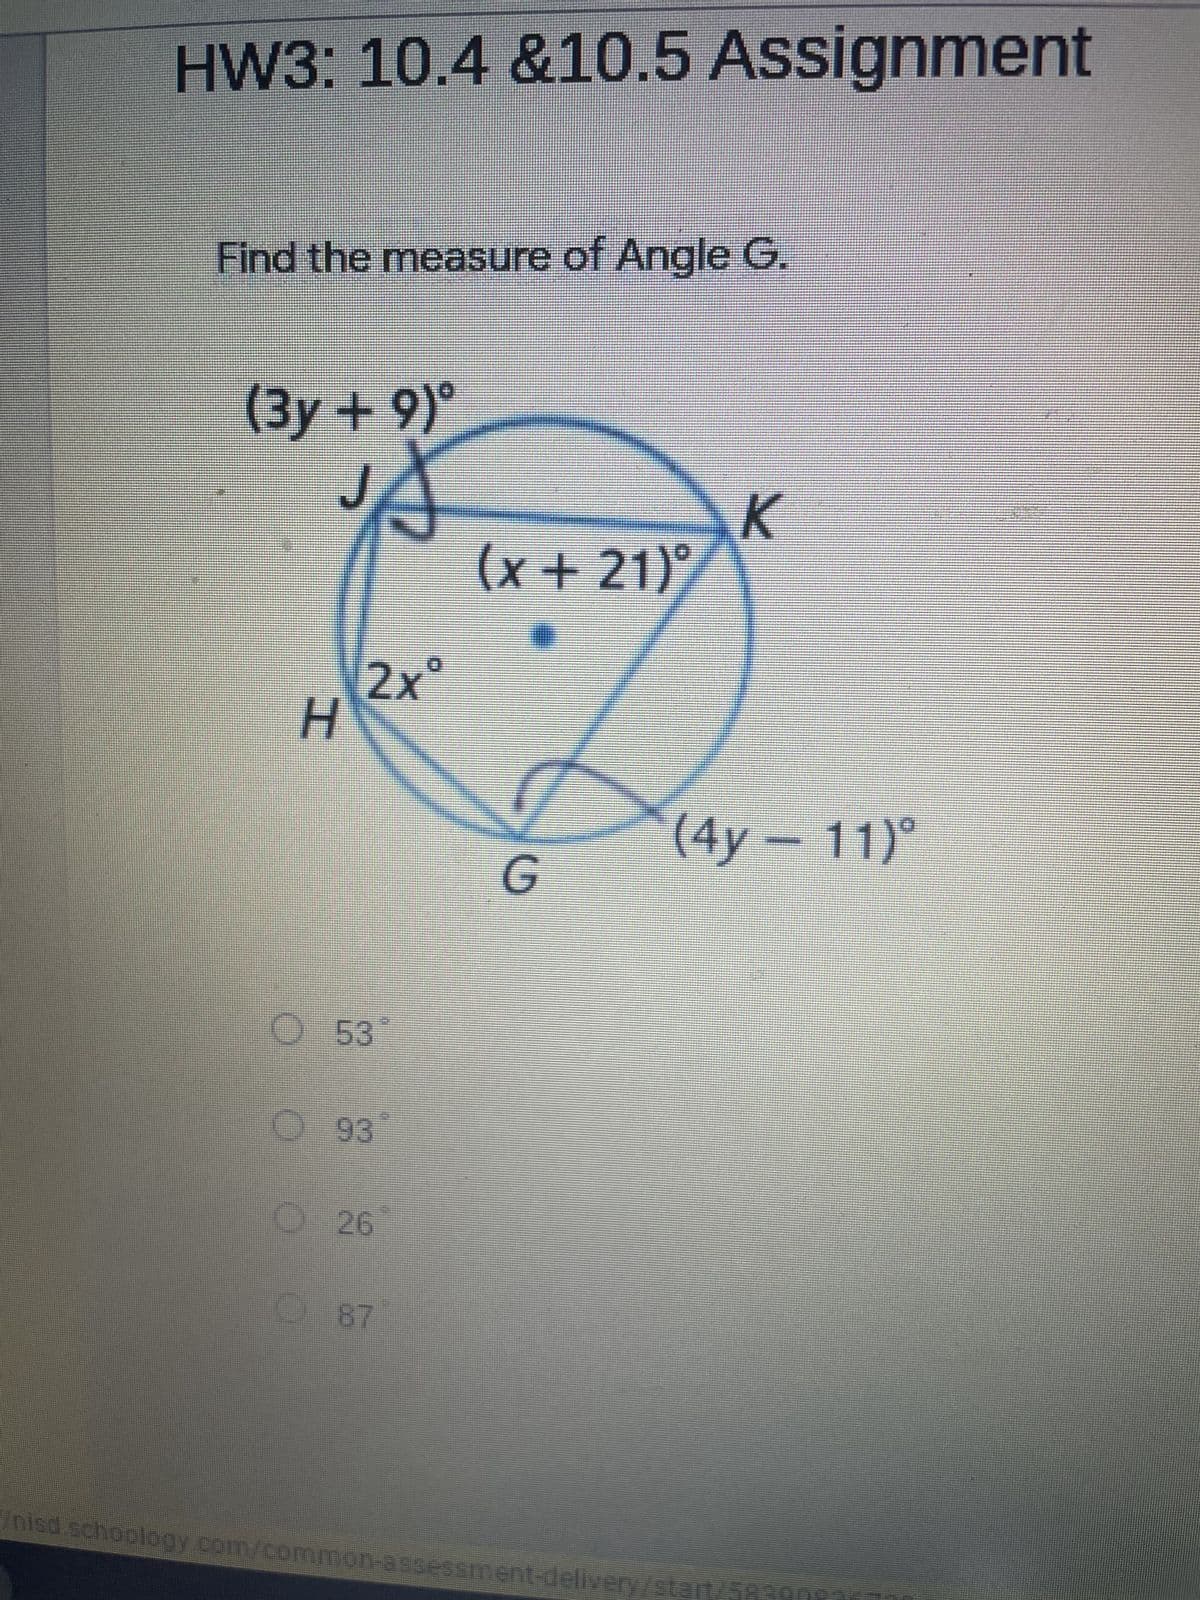 HW3: 10.4 &10.5 Assignment
Find the measure of Angle G.
(3y+9)⁰
A
K
(x+21)
2xº
(4y - 11)
H
O 53
93
26
G
87
nisd schoology.com/common-assessment-delivery/start/5820